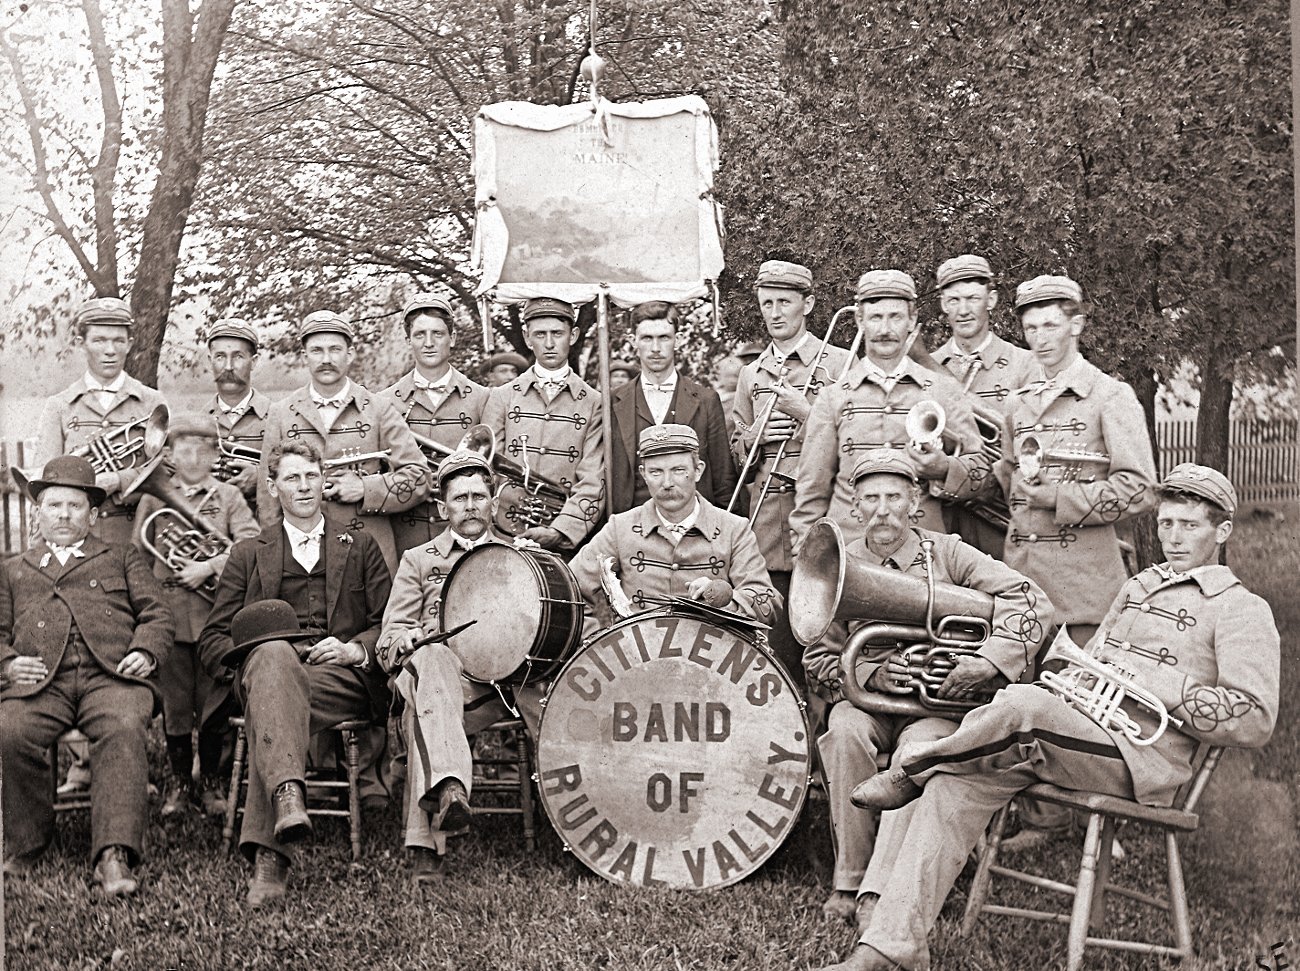 Rural Valley Band, about 1896.